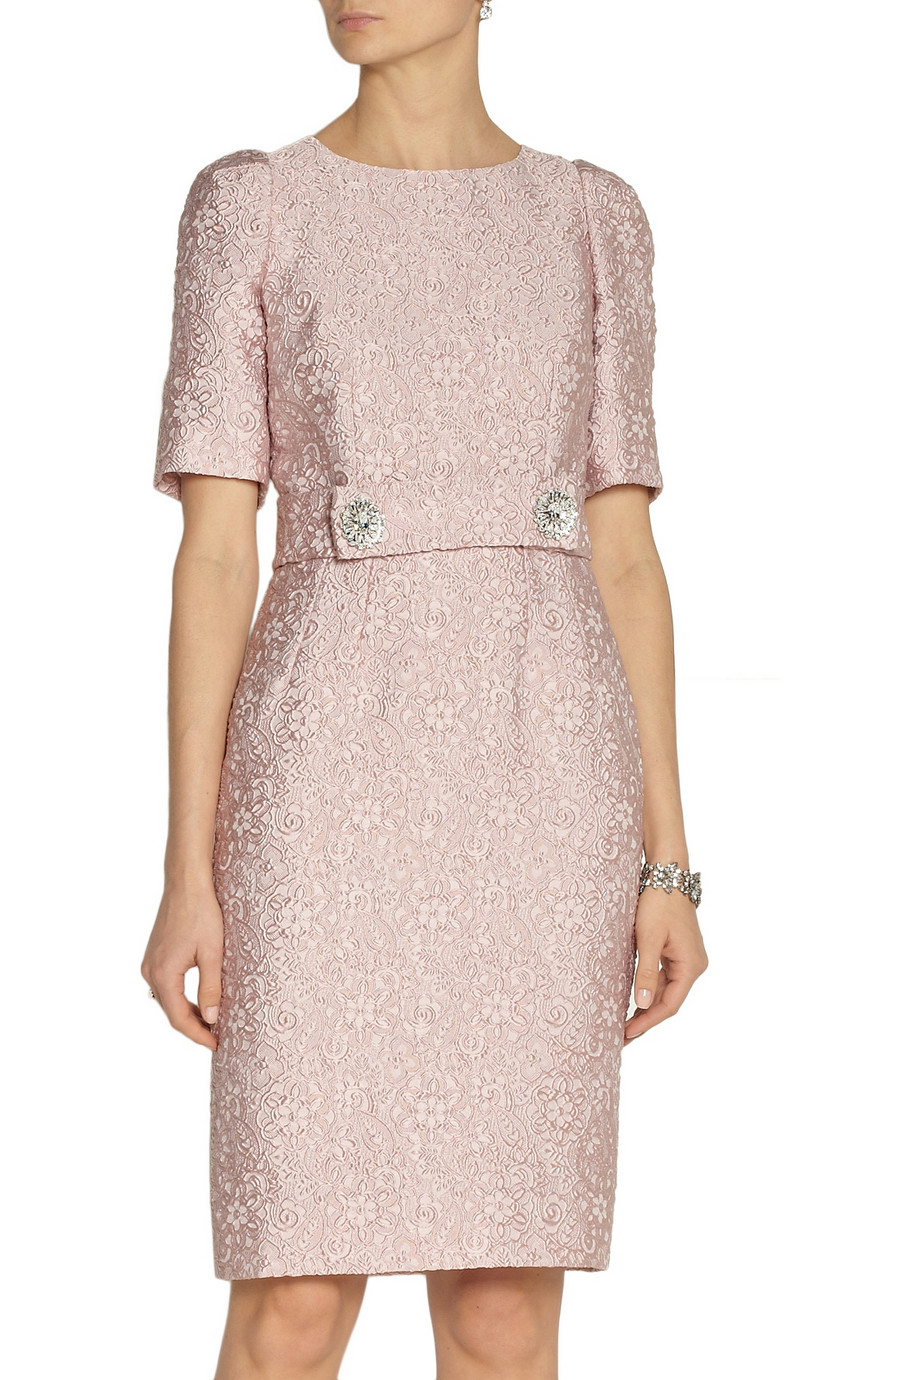 Lyst - Dolce & Gabbana Belted Jacquard Dress in Pink